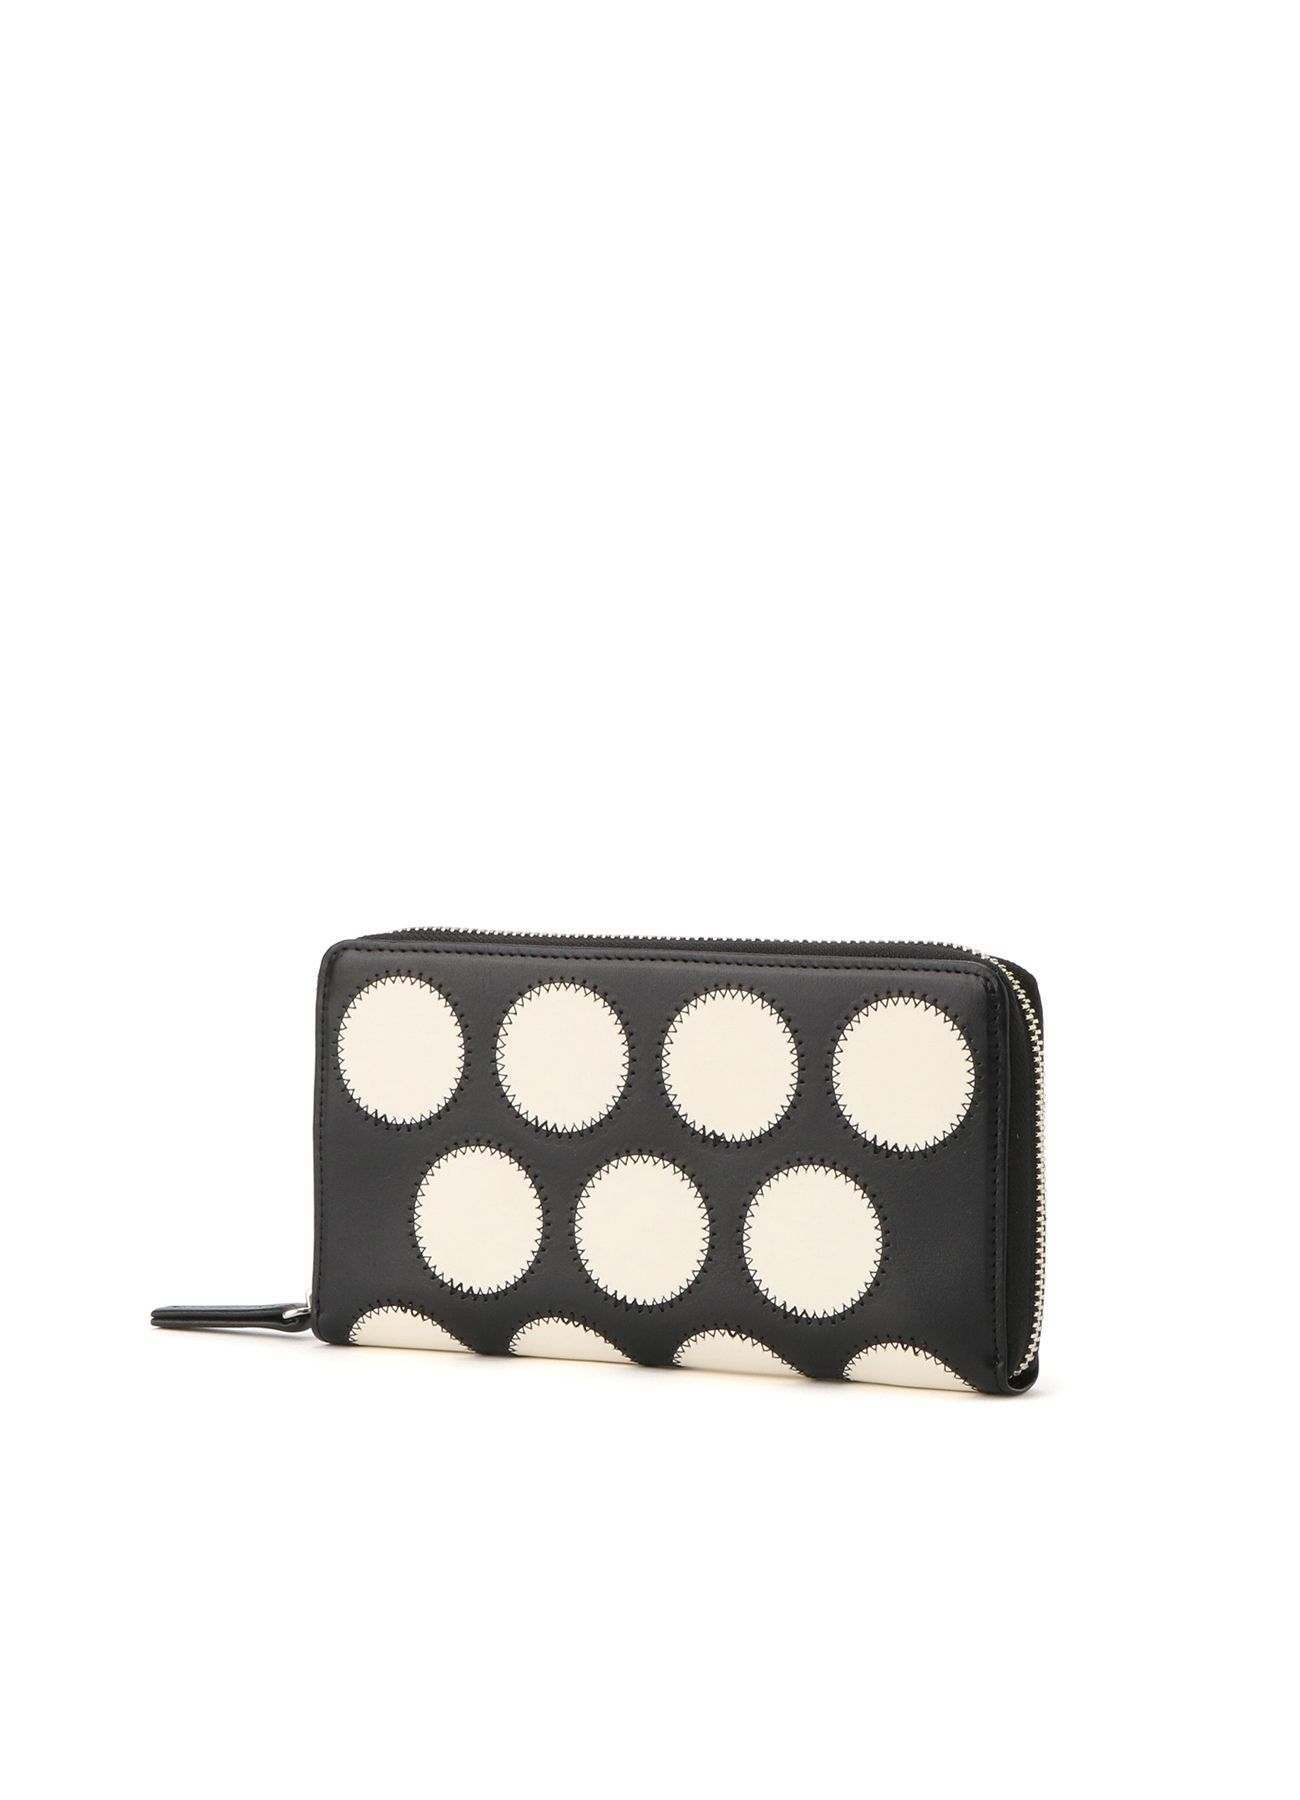 DOT PATCHWORK LEATHER LONG WALLET